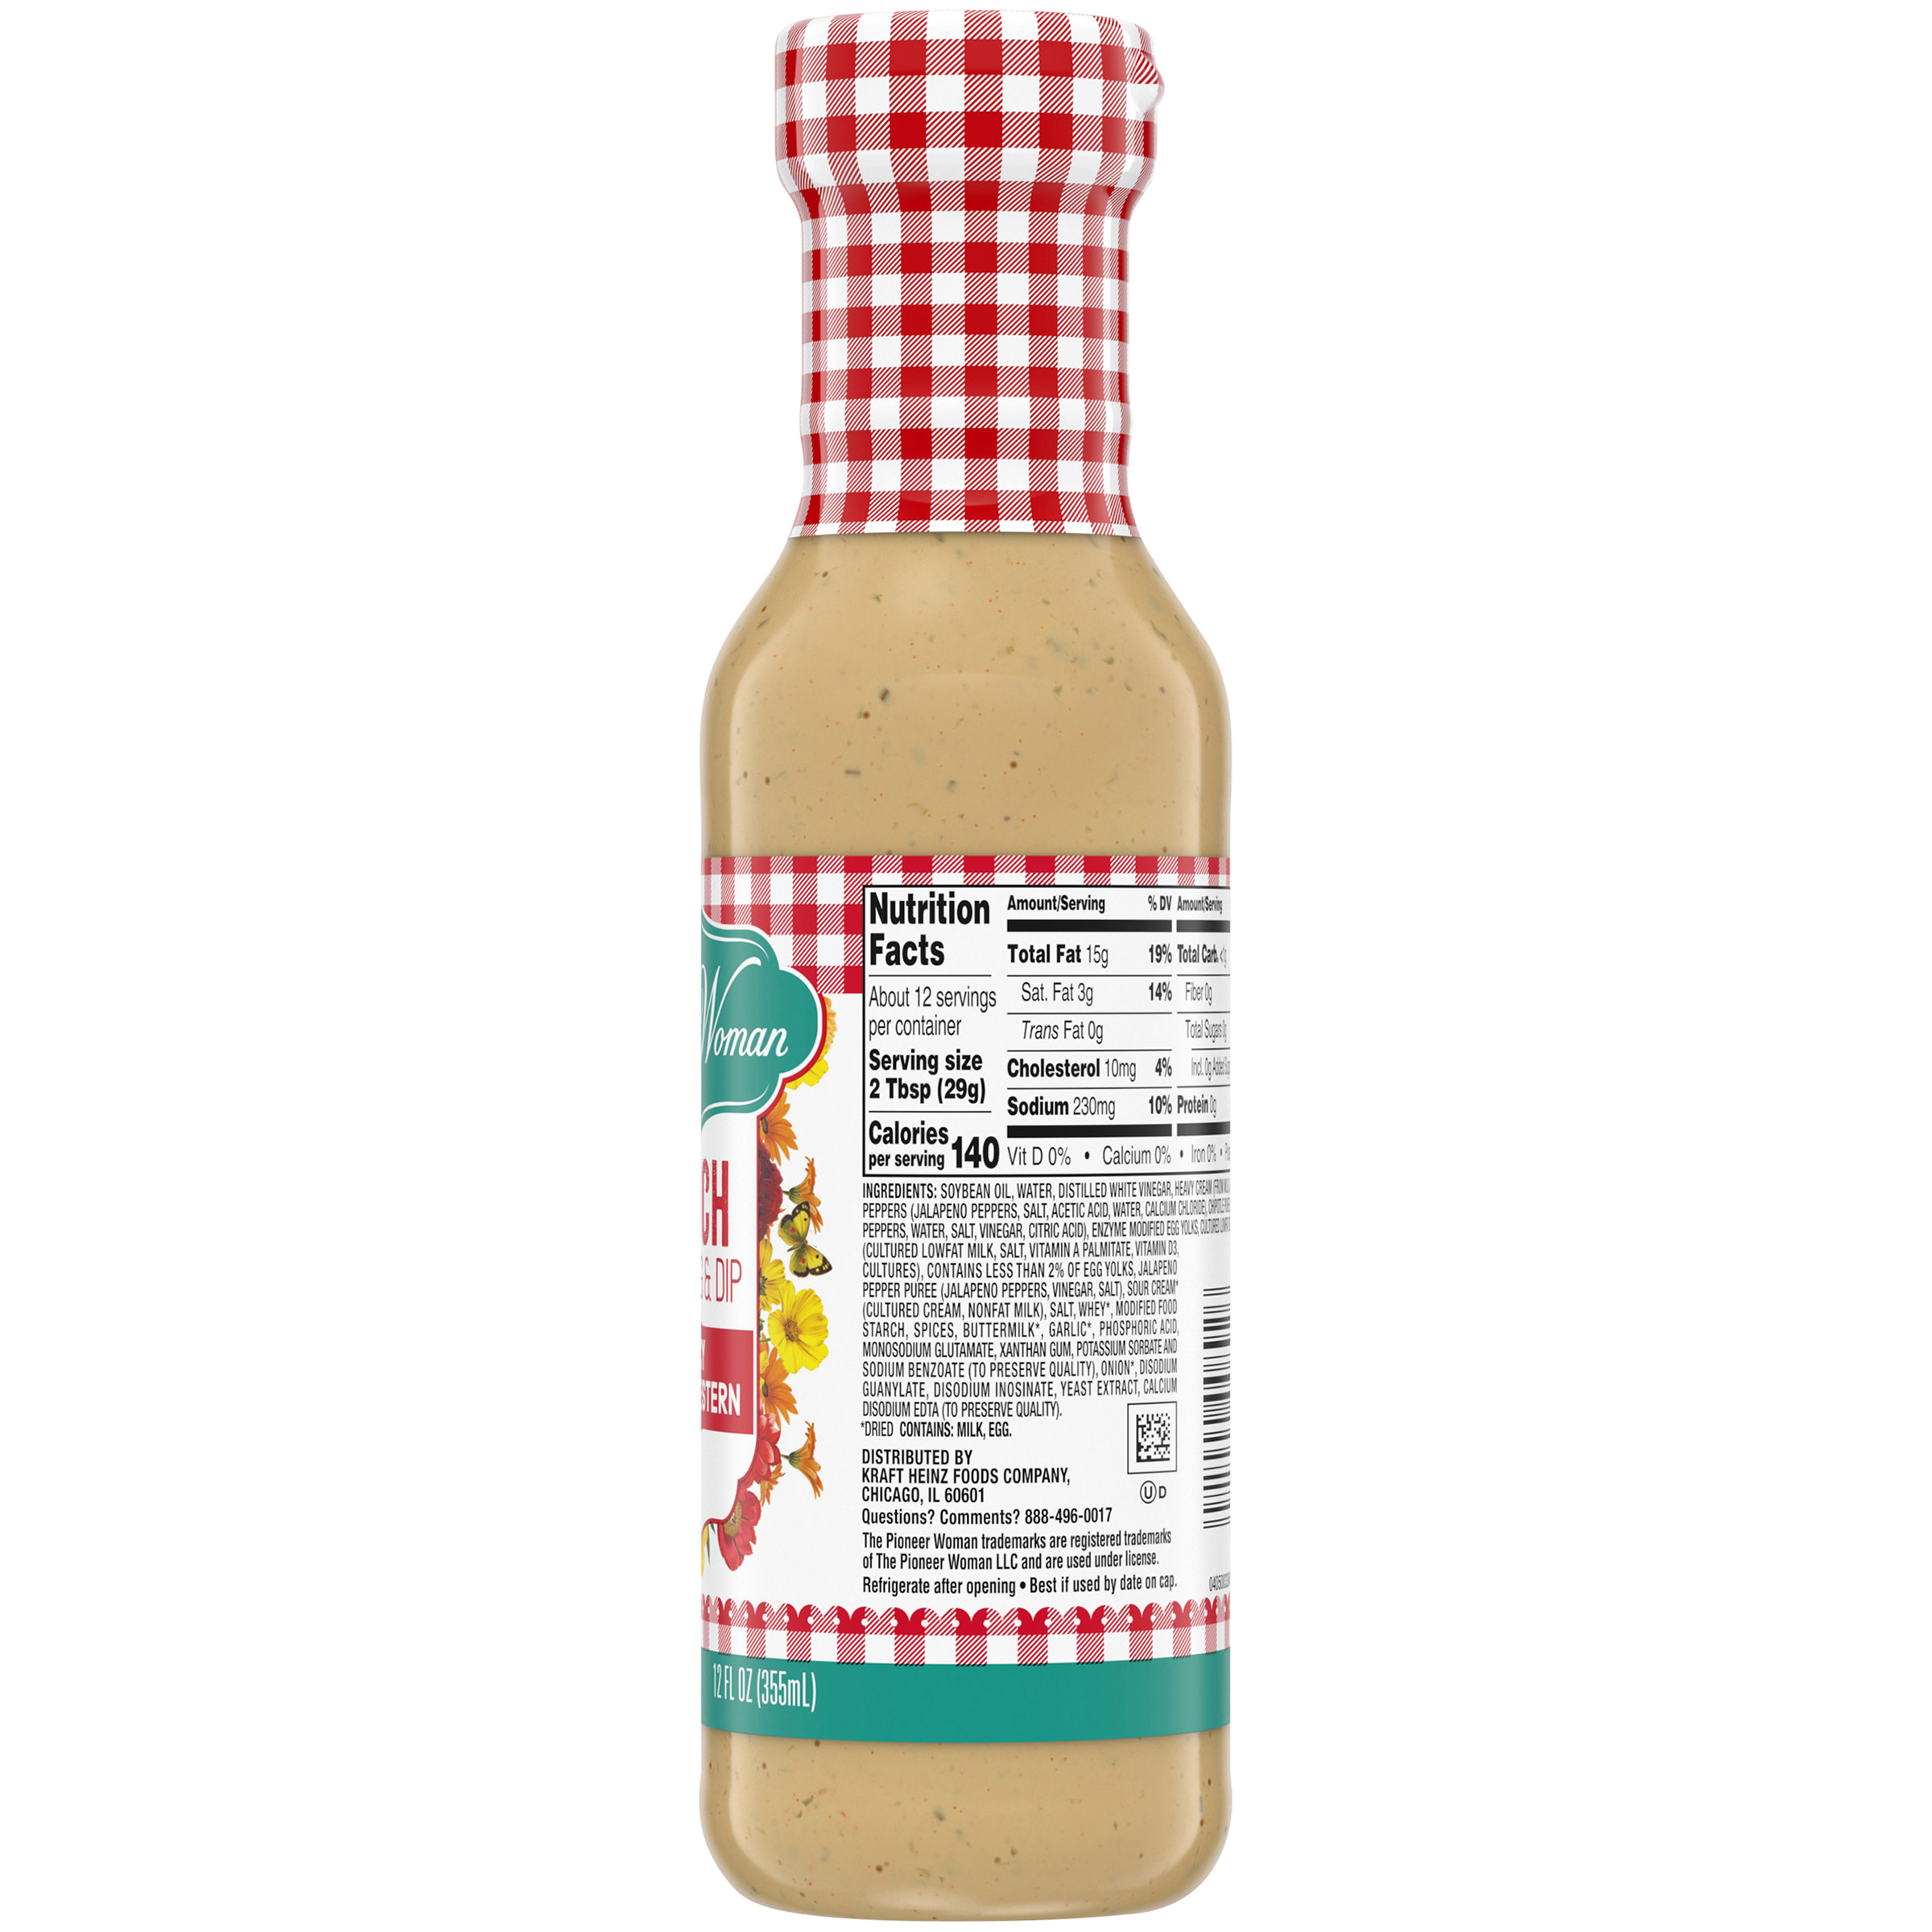 The Pioneer Woman Spicy Southwestern Ranch Salad Dressing & Dip, 12 fl oz Bottle - image 5 of 8